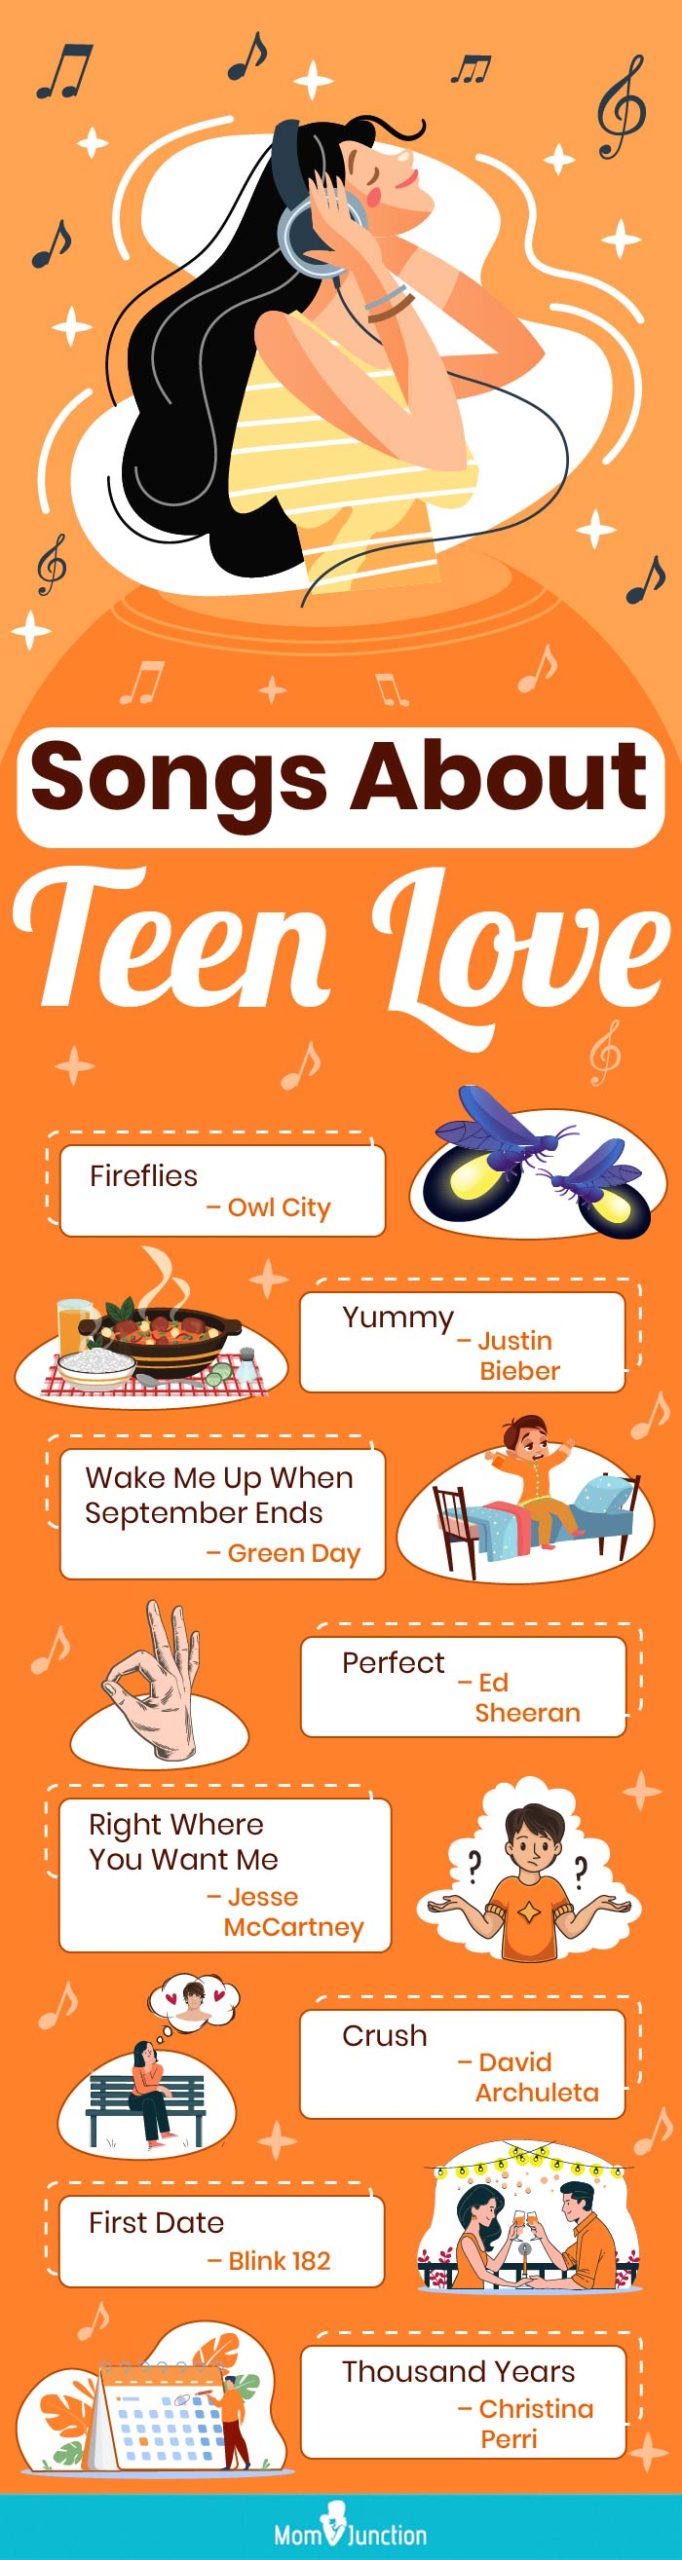 songs about teen love (infographic)